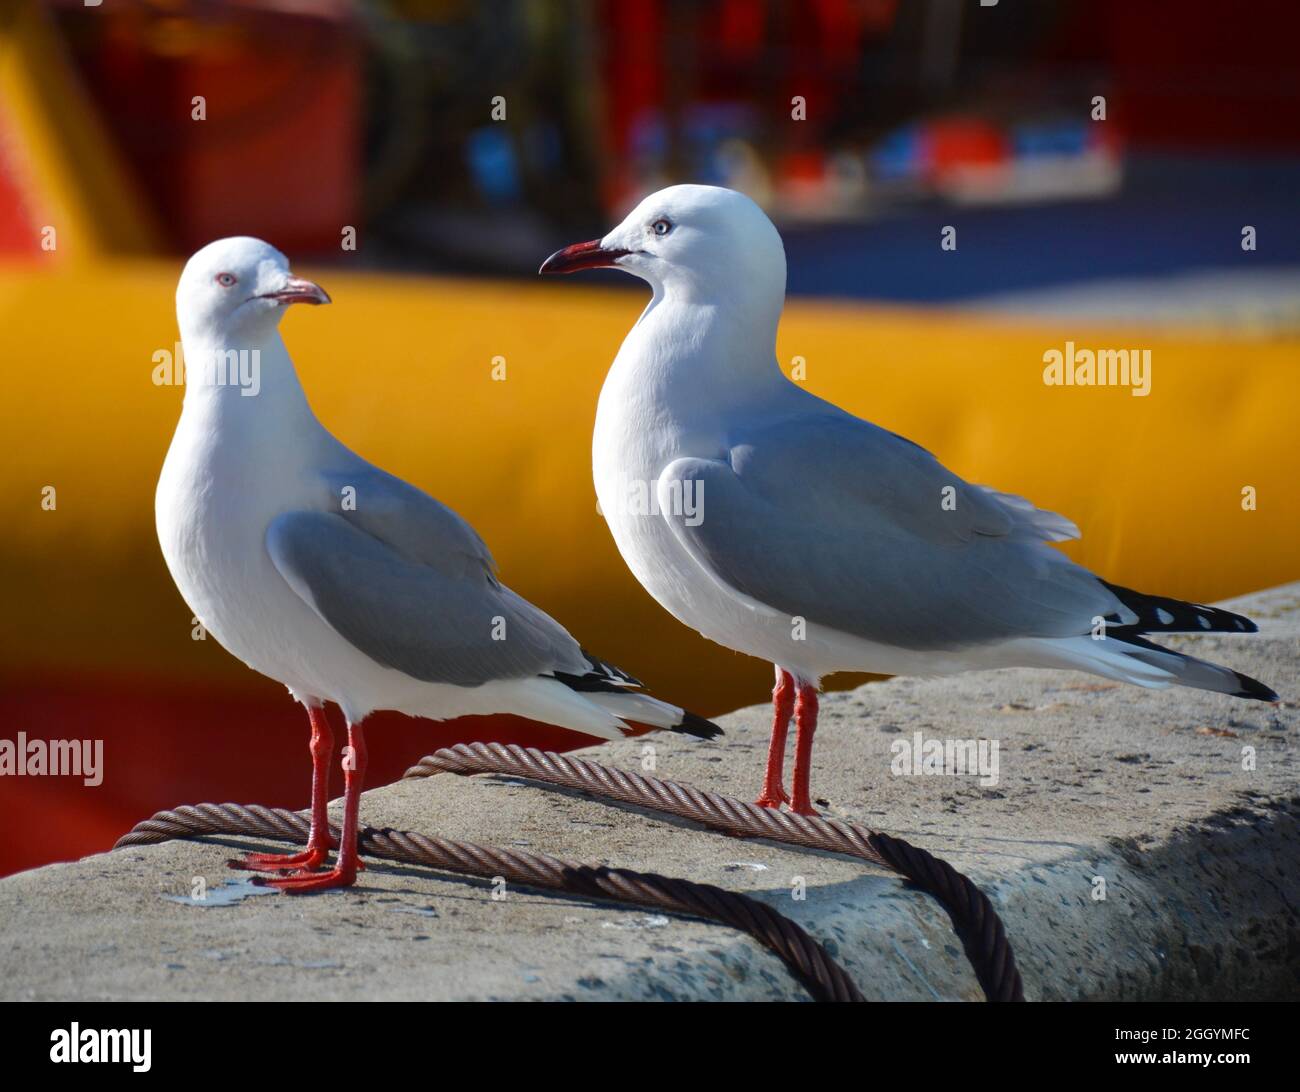 Two silver gull birds or seagulls with red beaks and legs standing on a stone dock near Salamanca Wharf in Hobart Stock Photo